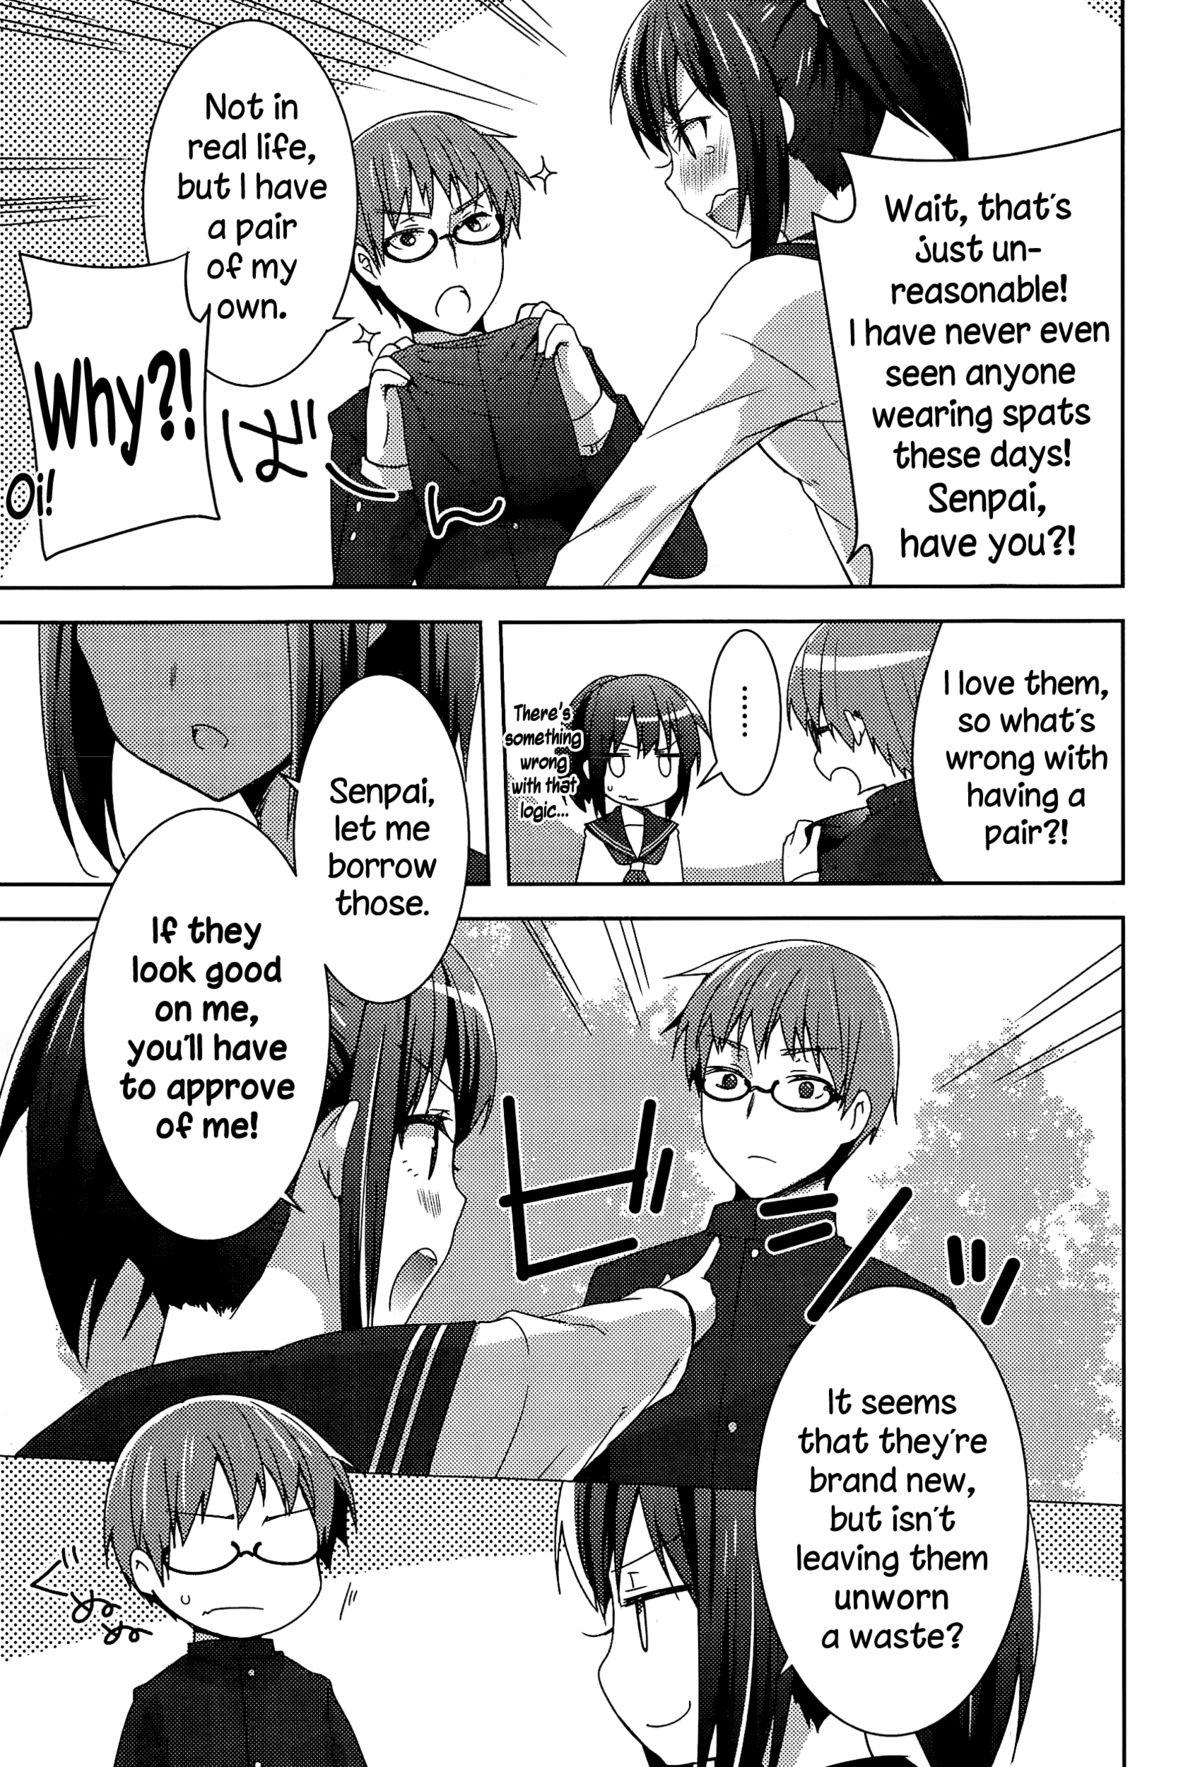 Friends Houkago Spats Club - Page 7